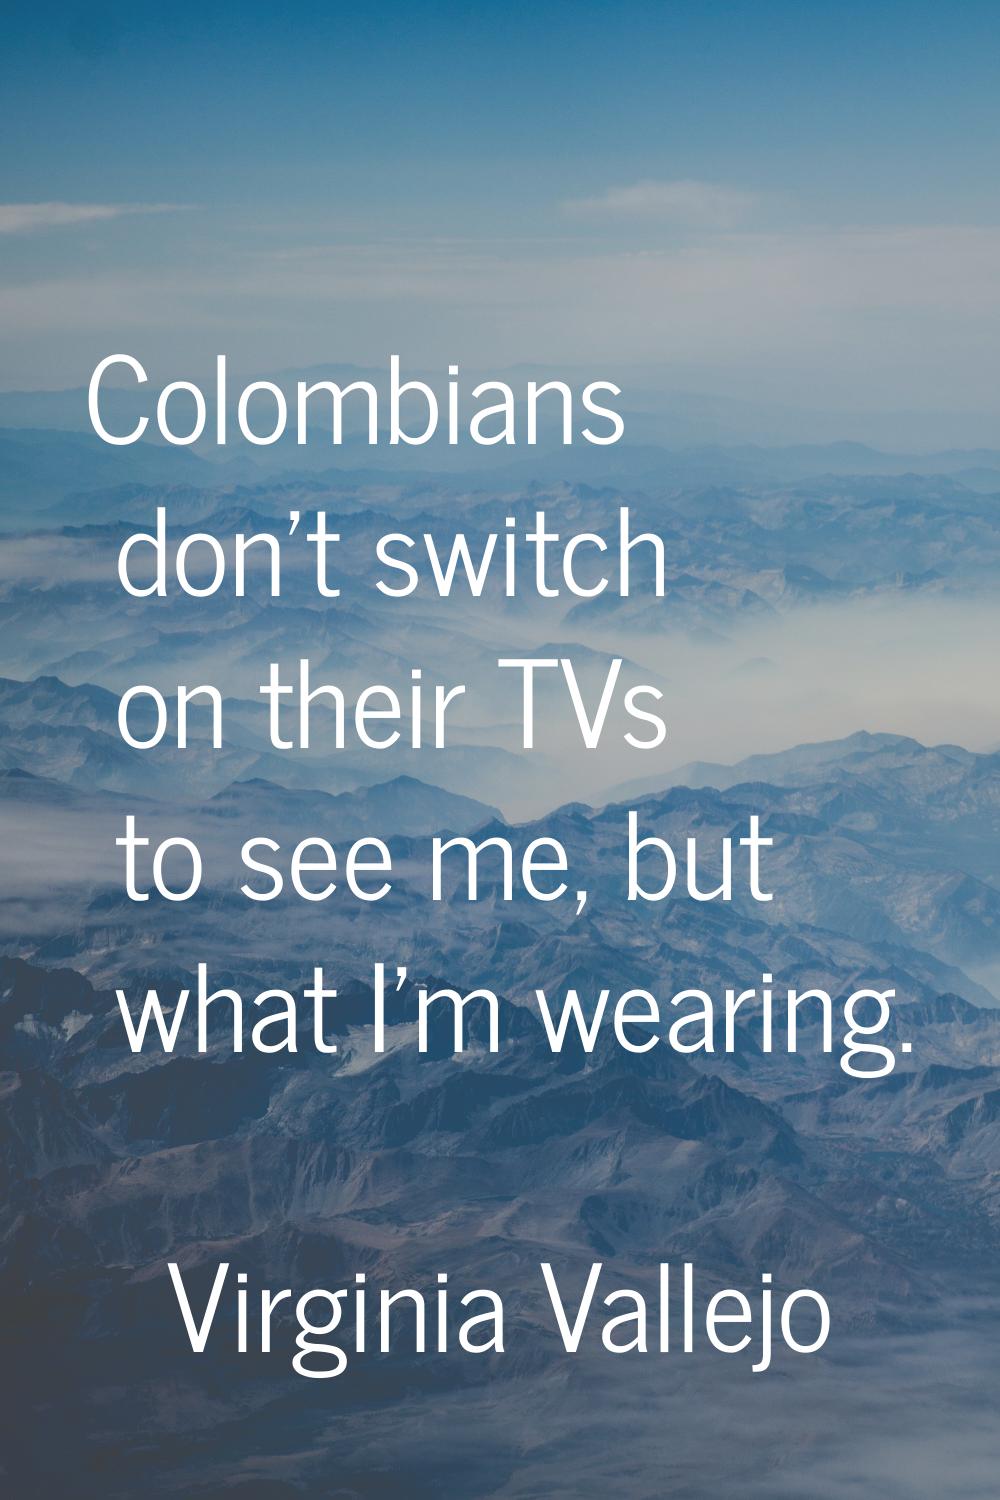 Colombians don't switch on their TVs to see me, but what I'm wearing.